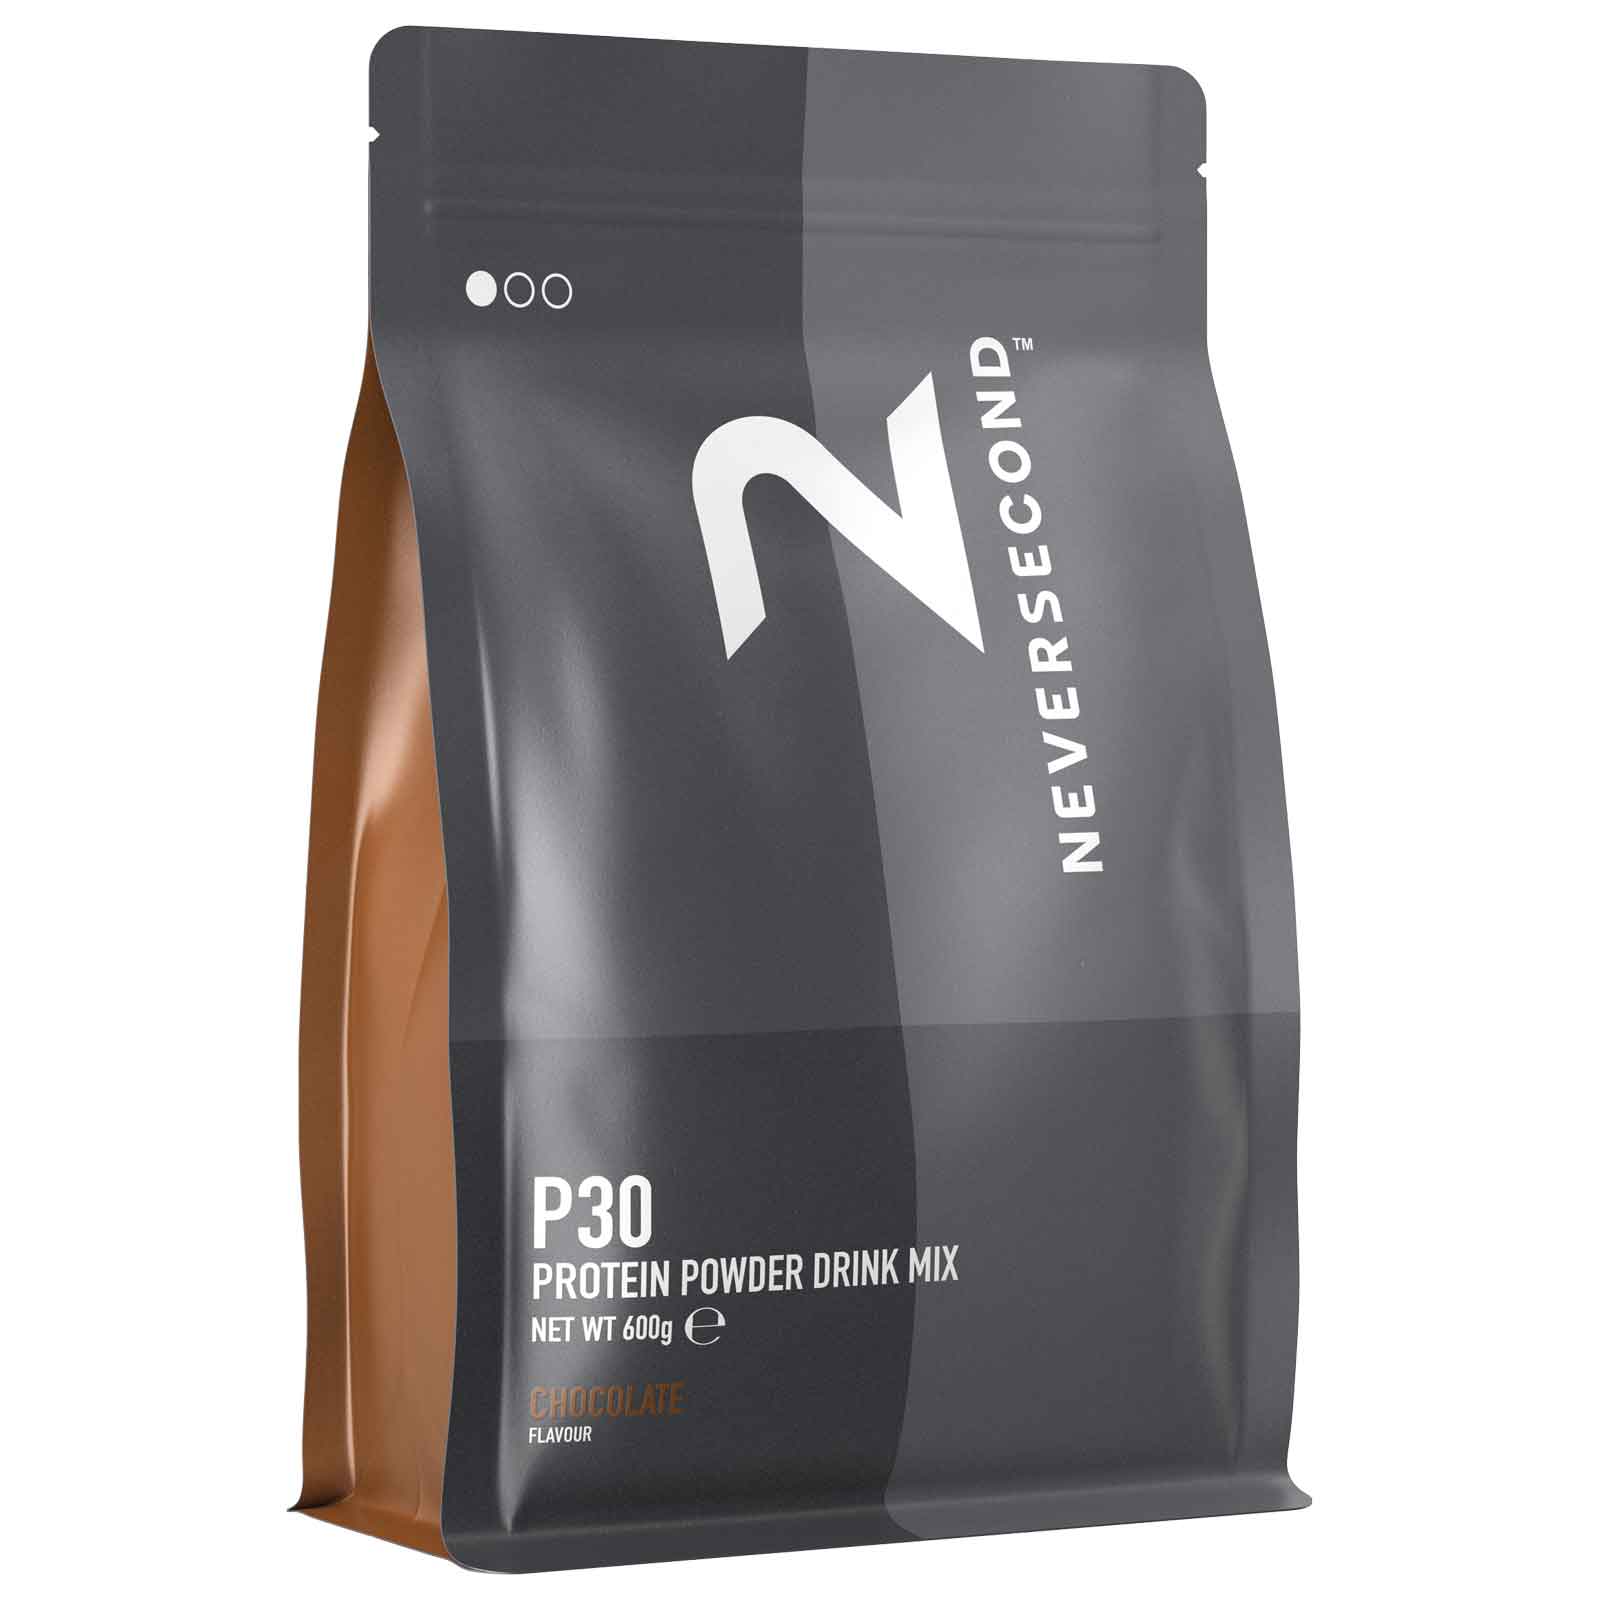 Productfoto van Neversecond P30 Recovery Drink Mix - Protein Beverage Powder - 600g